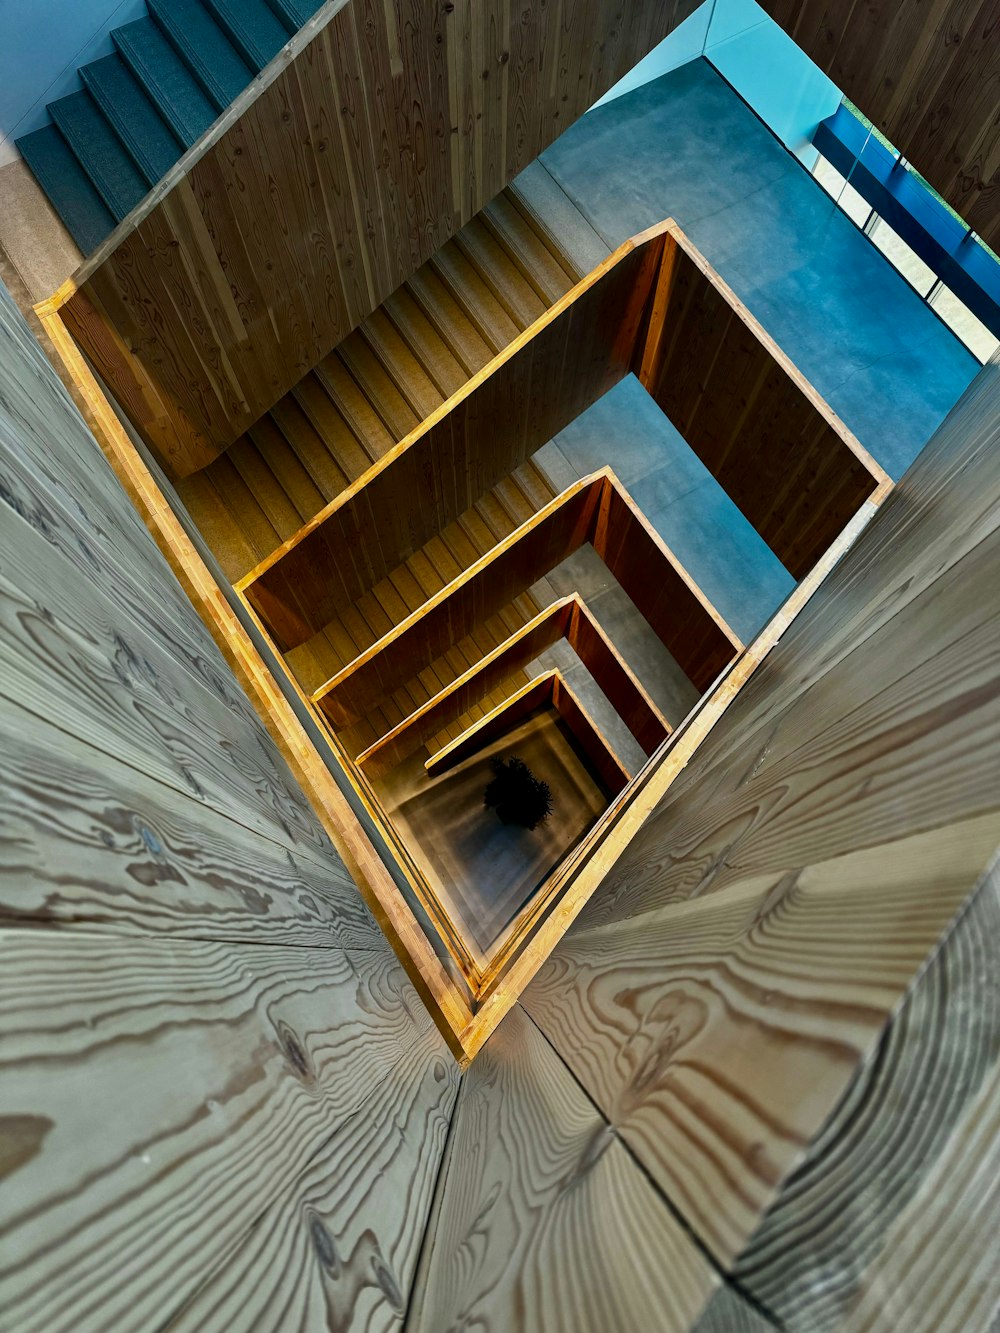 a close up of a wooden floor with a mirror